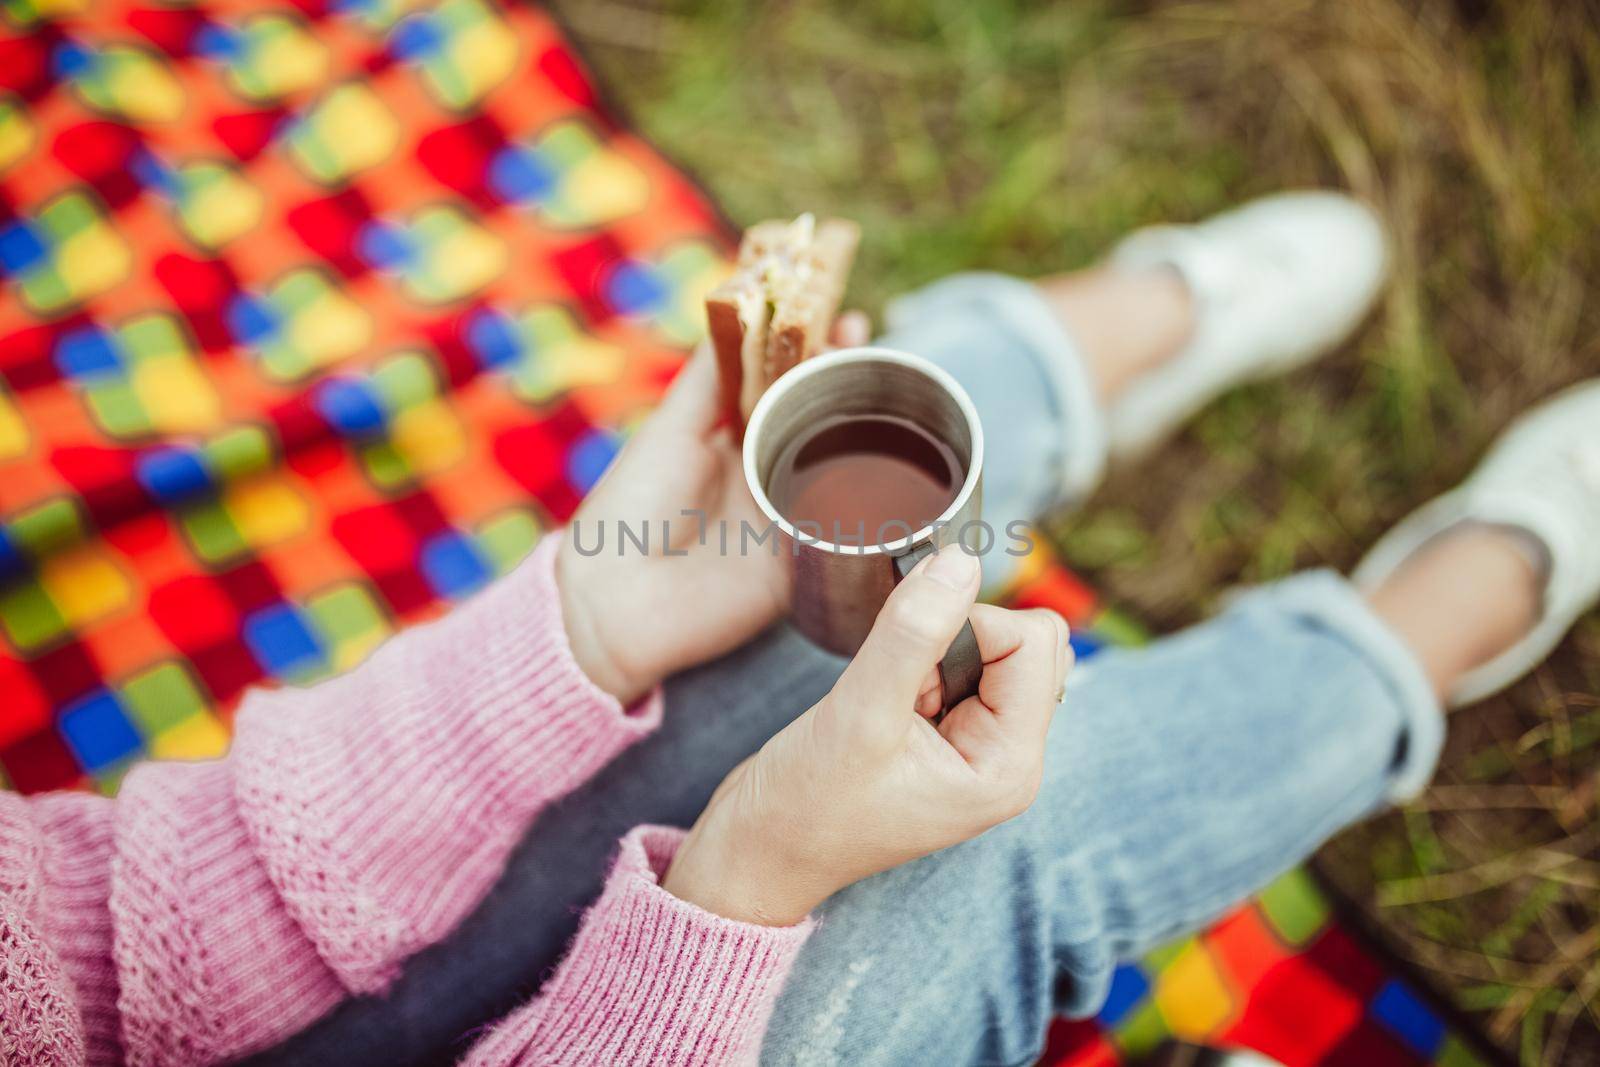 Snack in nature outdoors. Close up shot of female hand holding sandwich and cup of hot drink. Caucasian woman sitting on picnic blanket at grass. Top view.